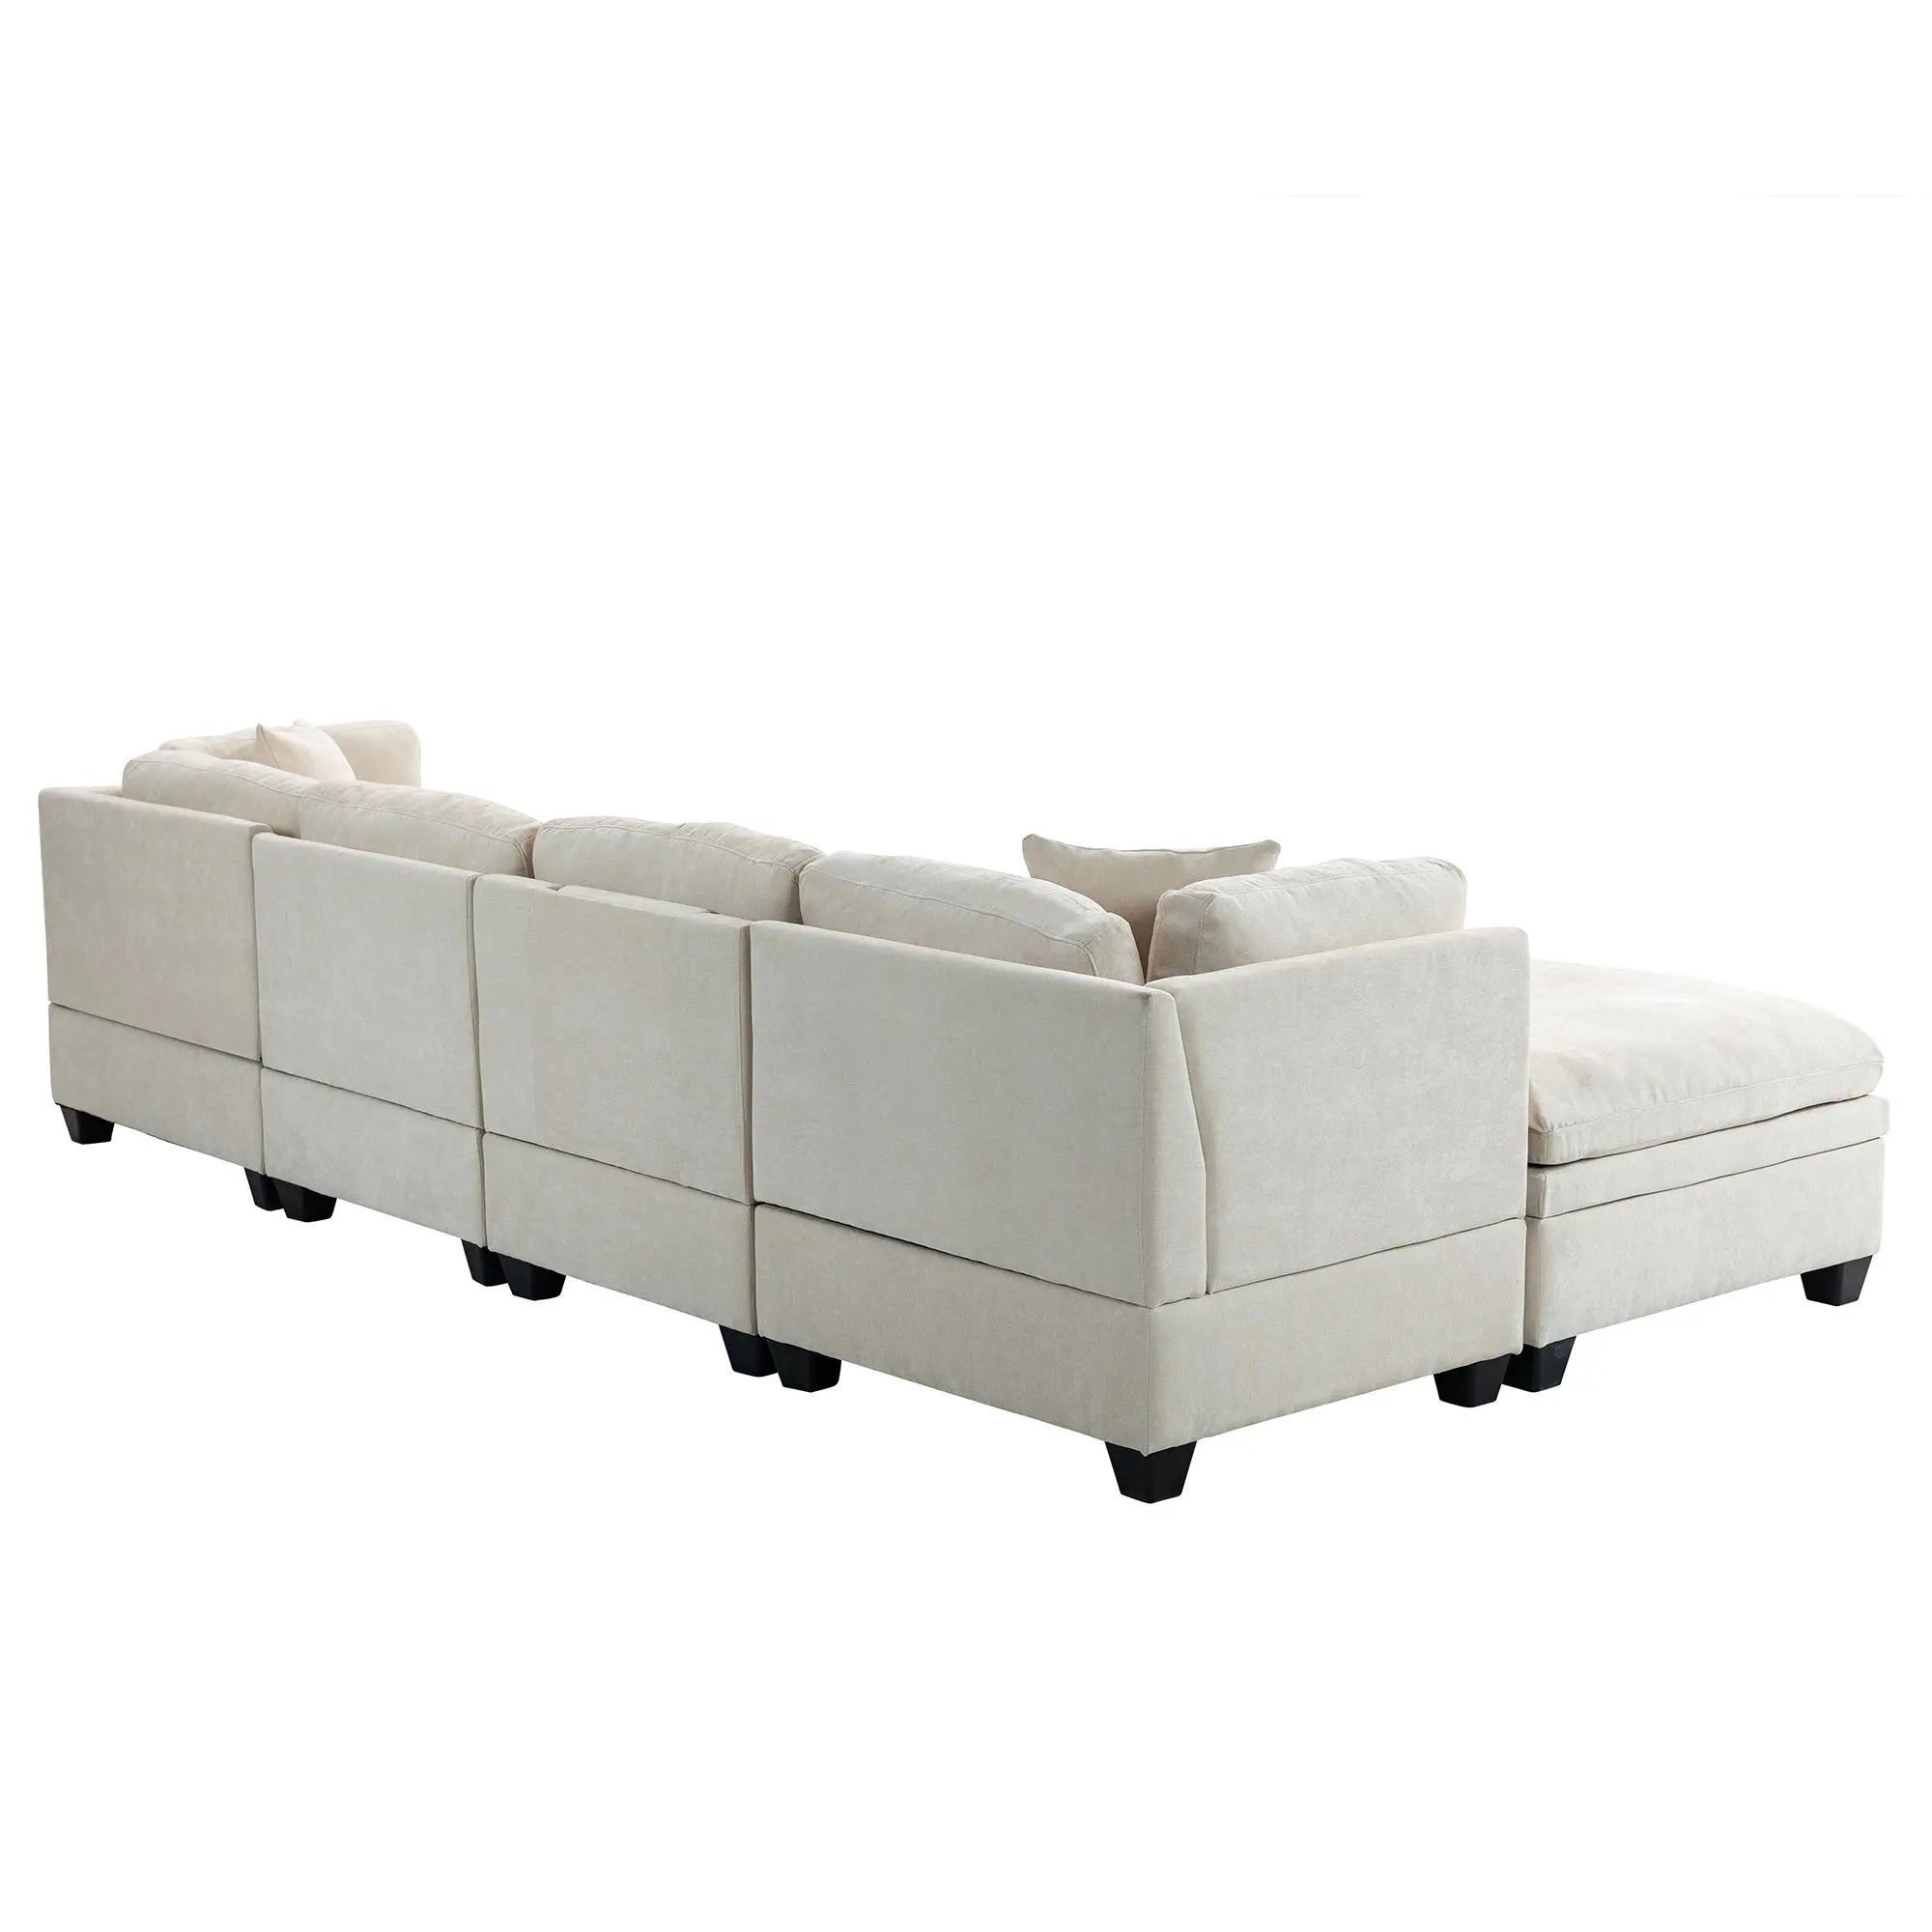 Bellemave 128.7" Upholstered Modular Sofa with Removable Storage Ottoman and 2 hidden cup holders Bellemave